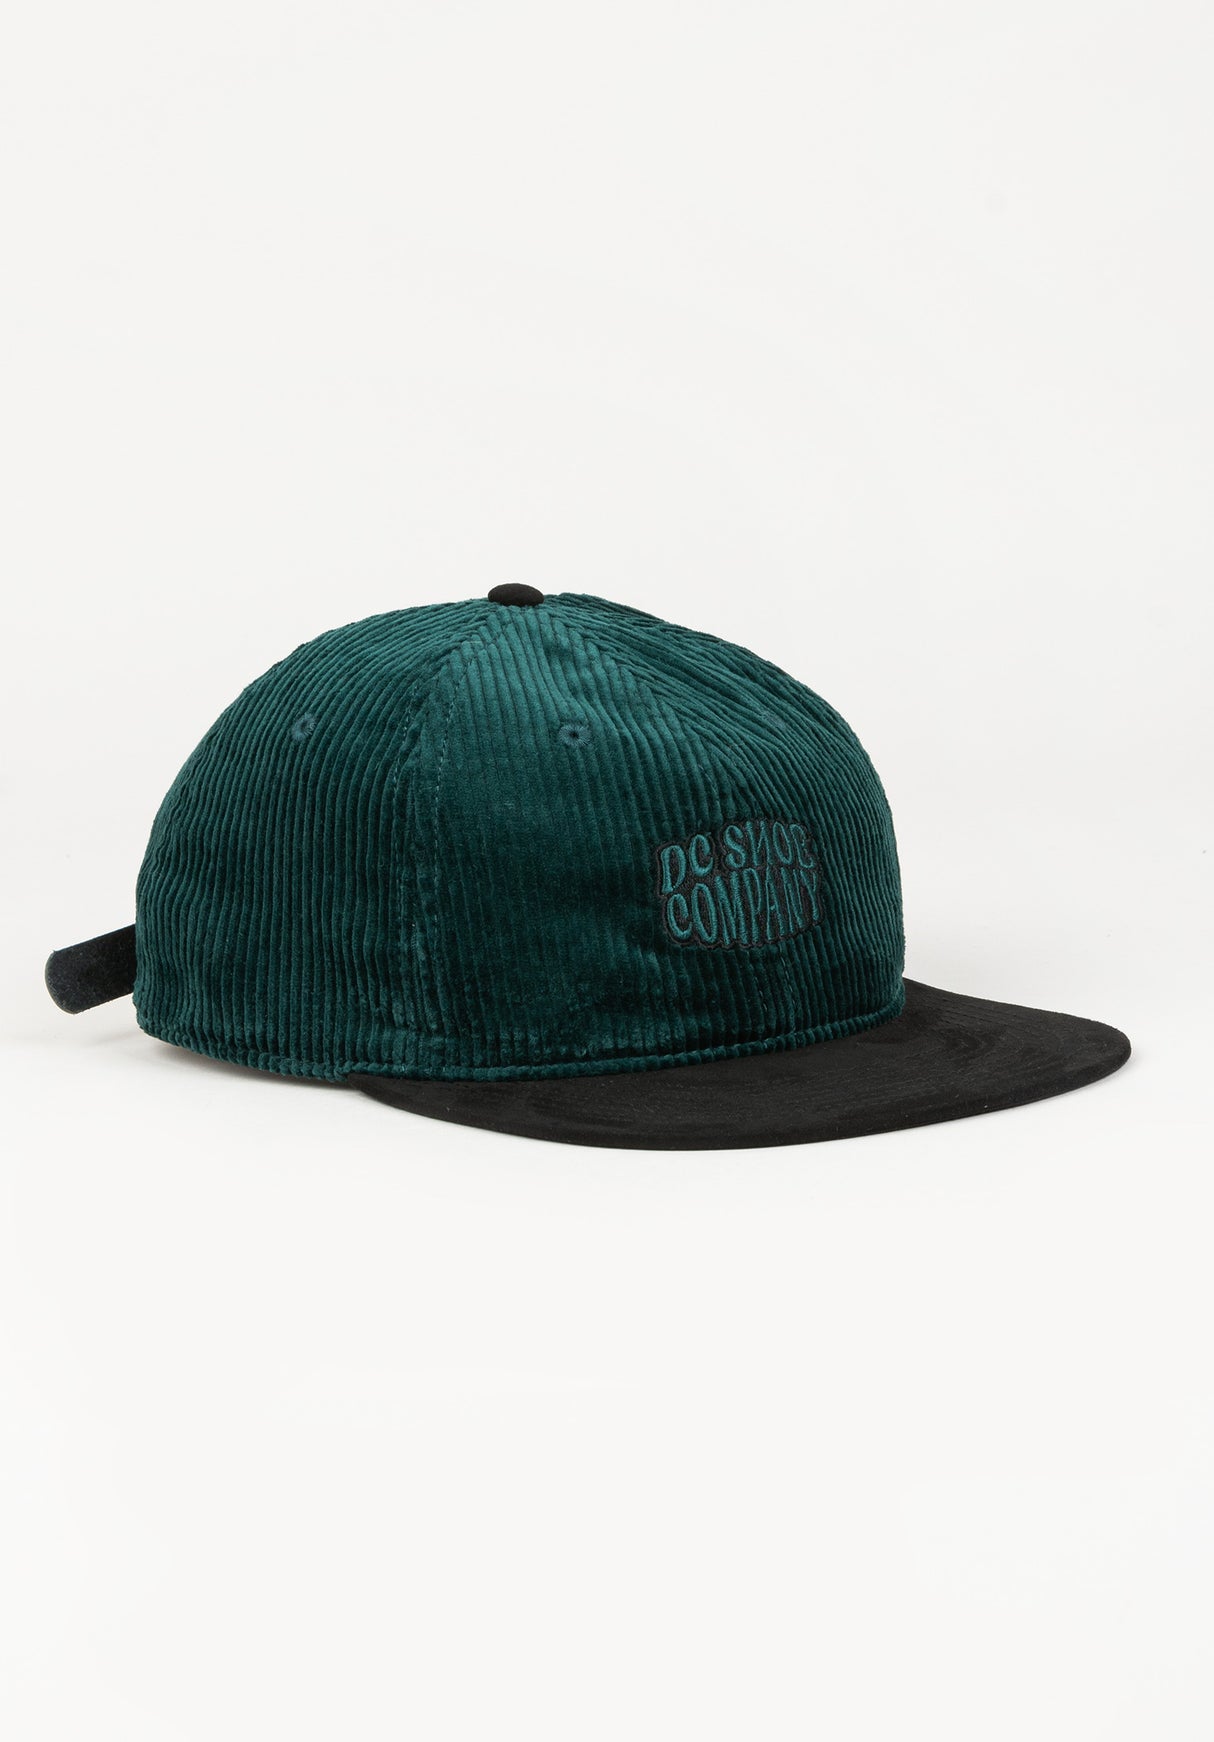 Cypher Strapback DC Shoes for sycamore in TITUS Cap – Men